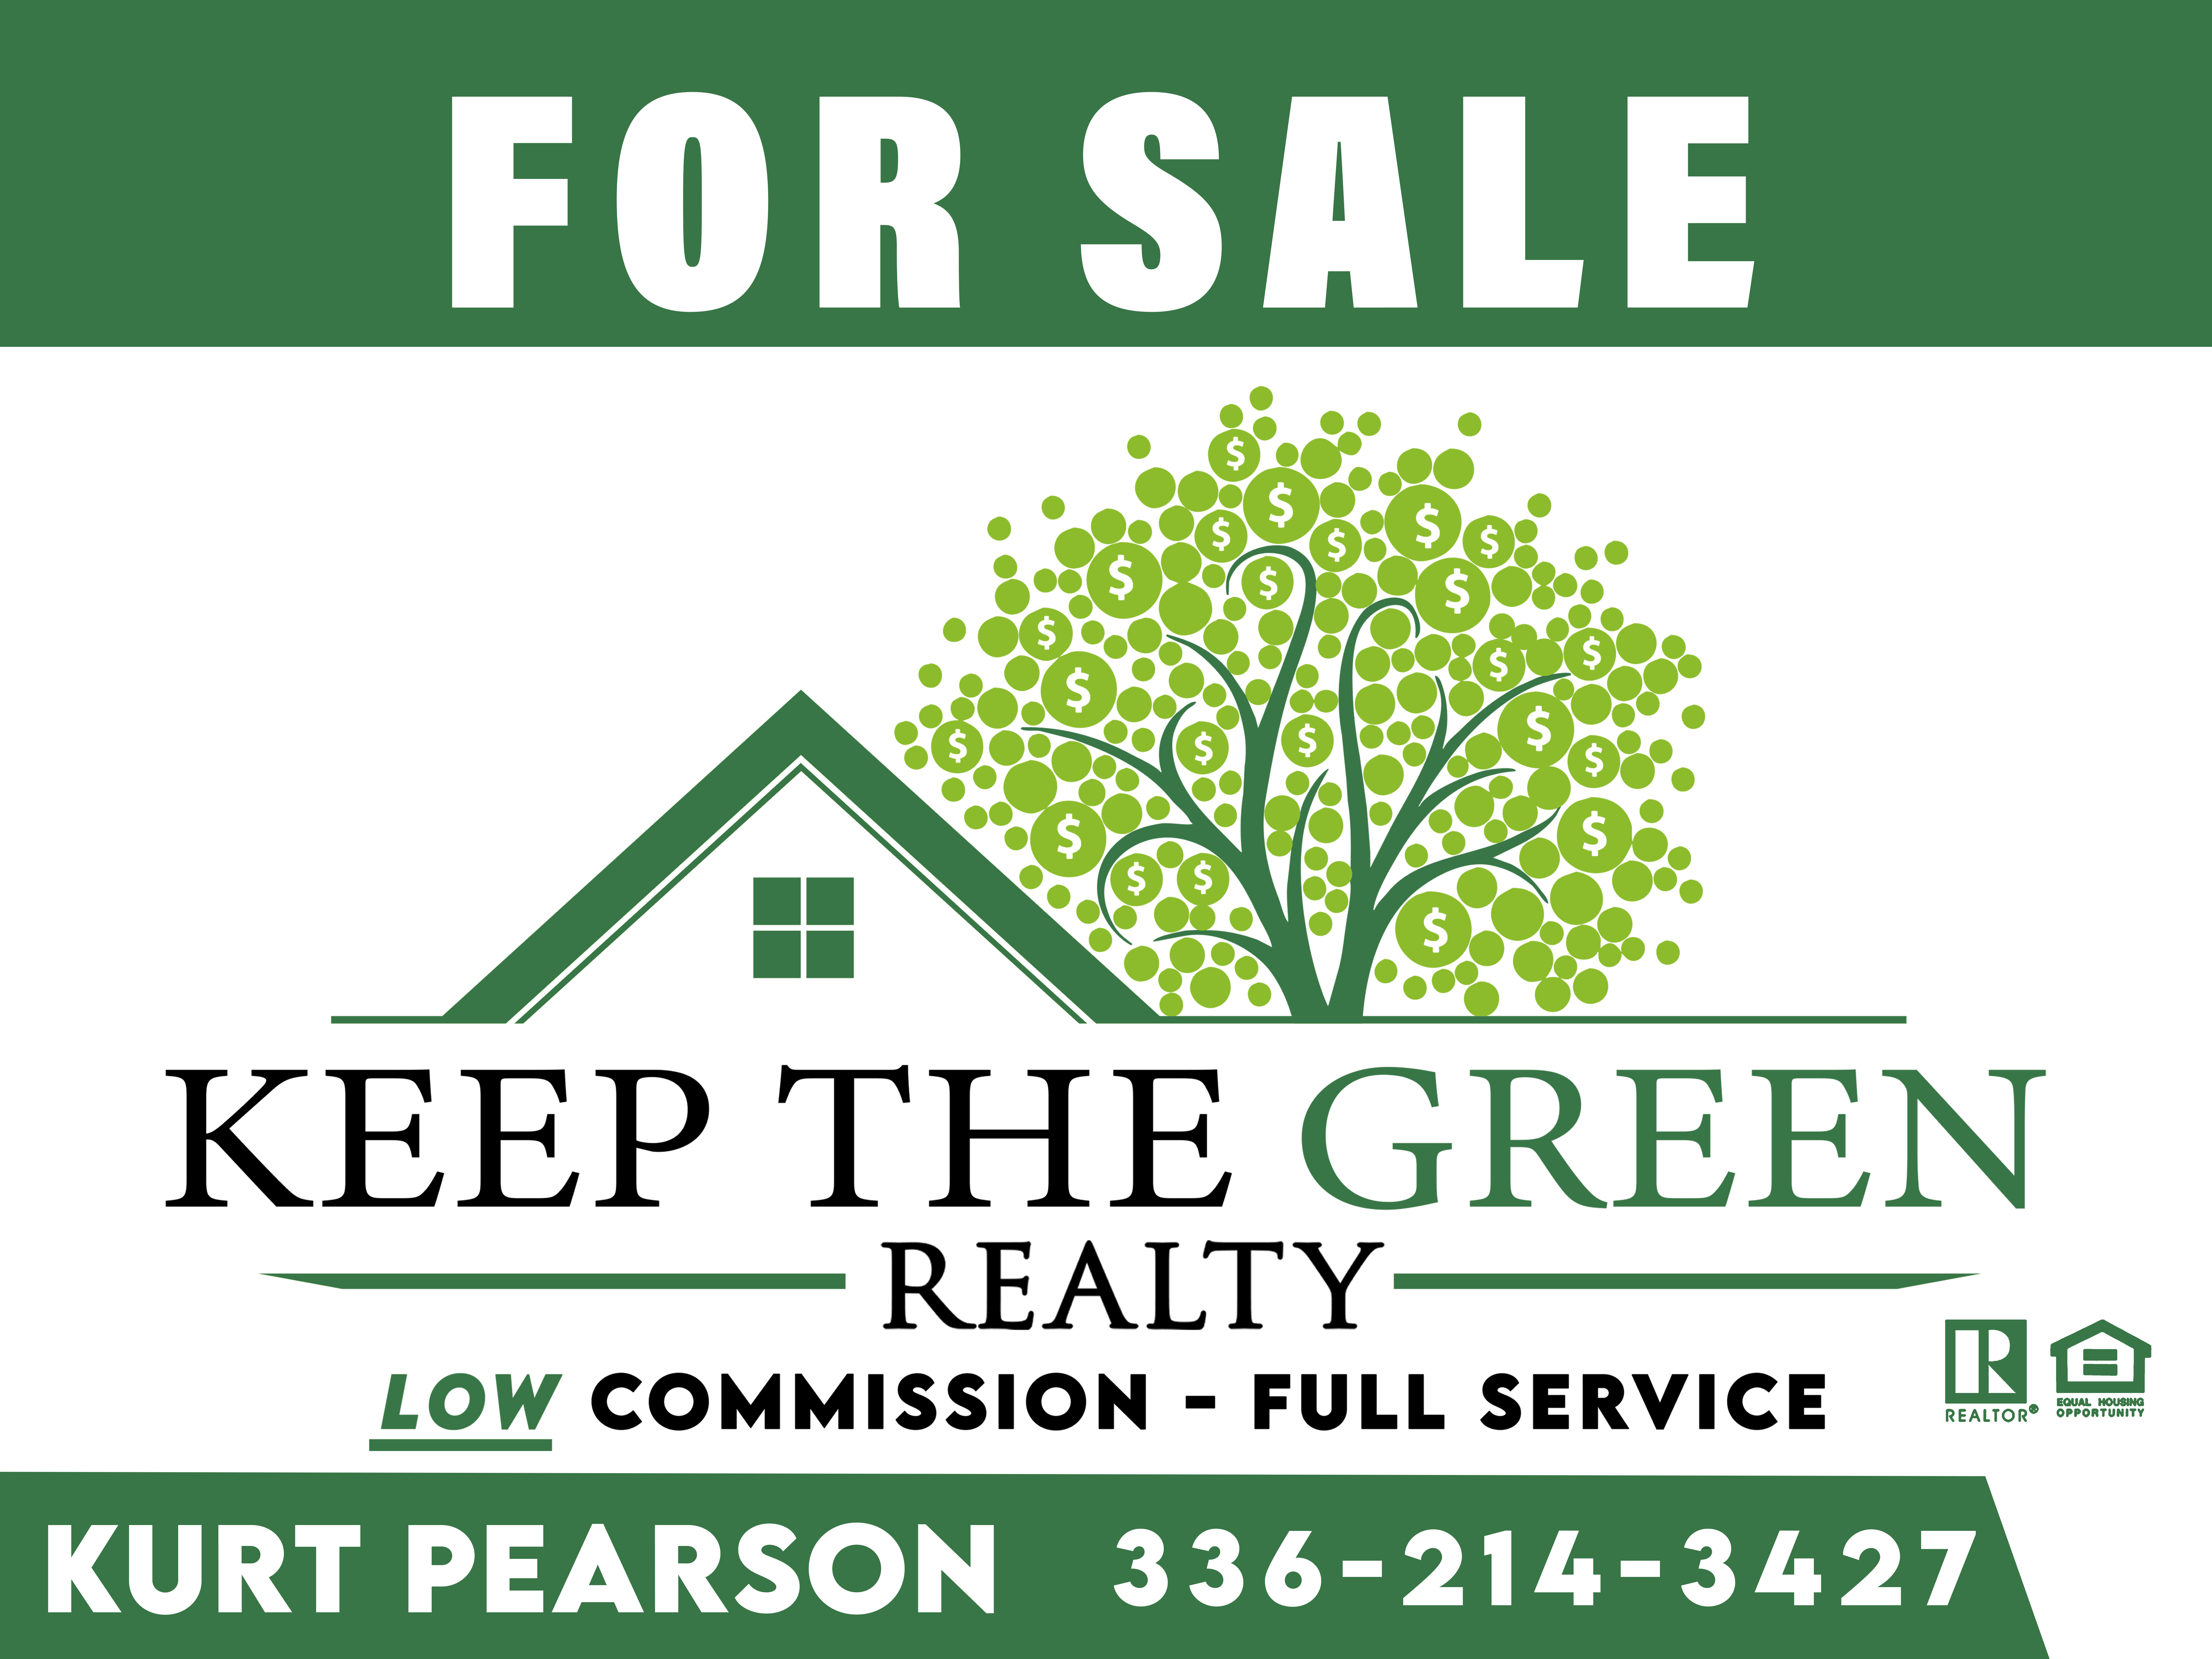 For Sale Sign - Keep the Green Realty 